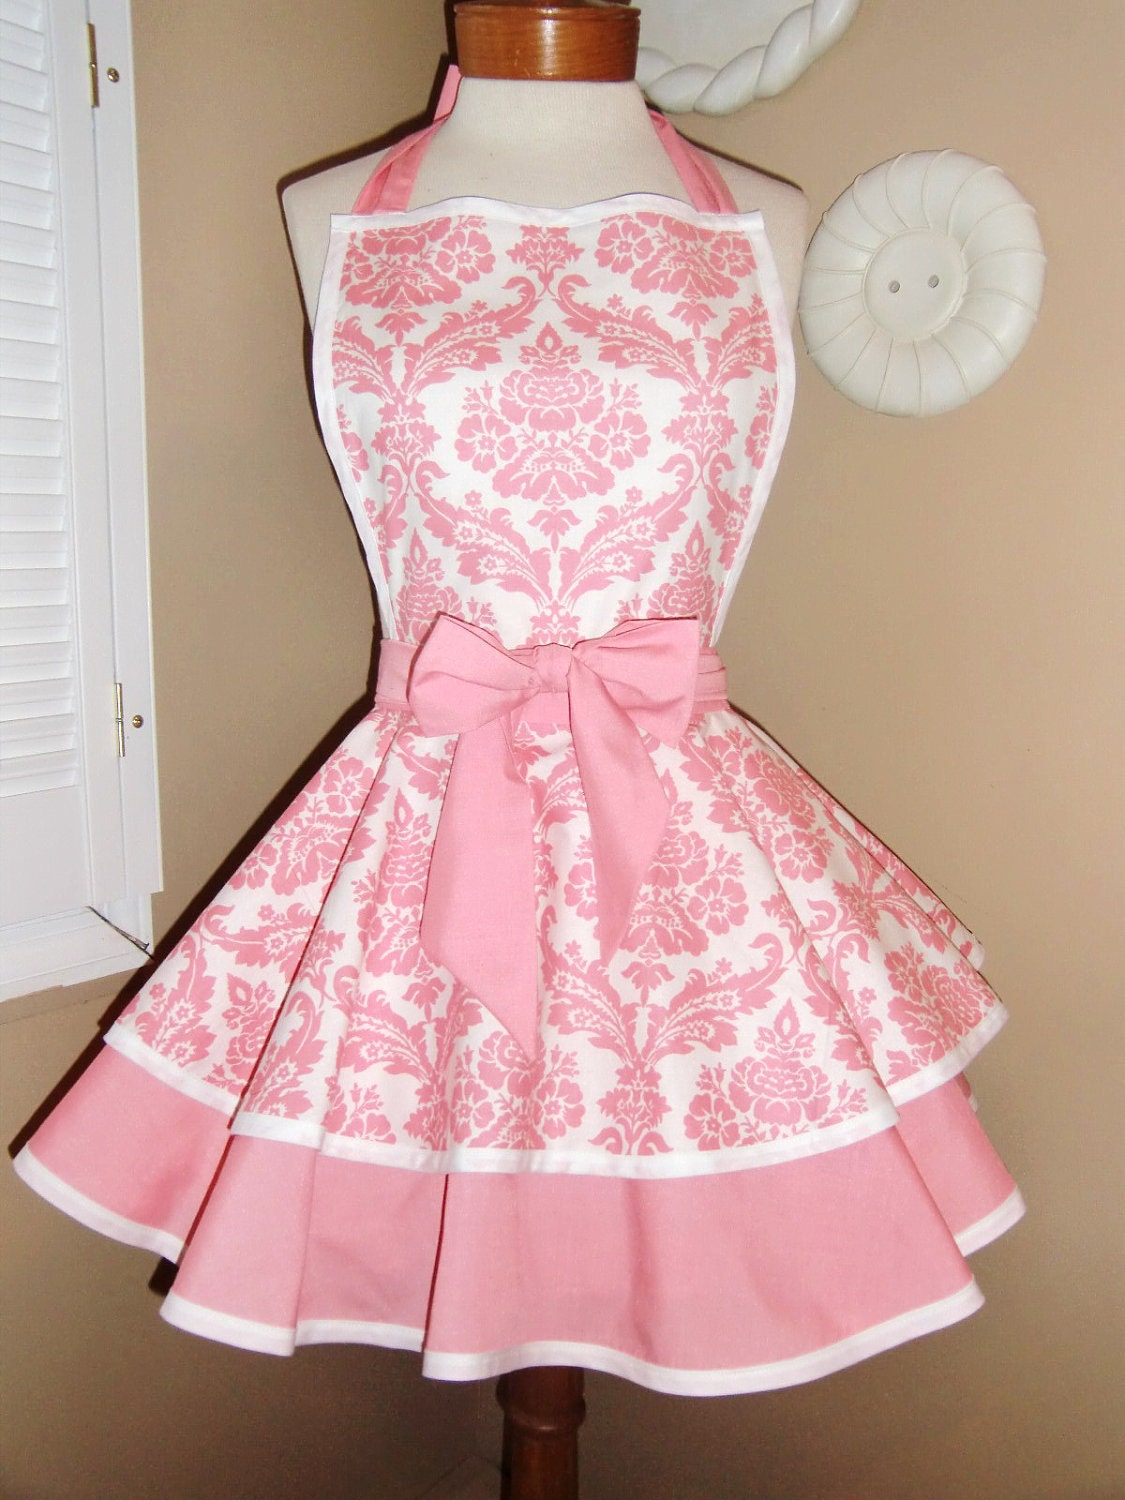 Pink Damask Print Womans Retro Apron With Tiered Skirt And Bib